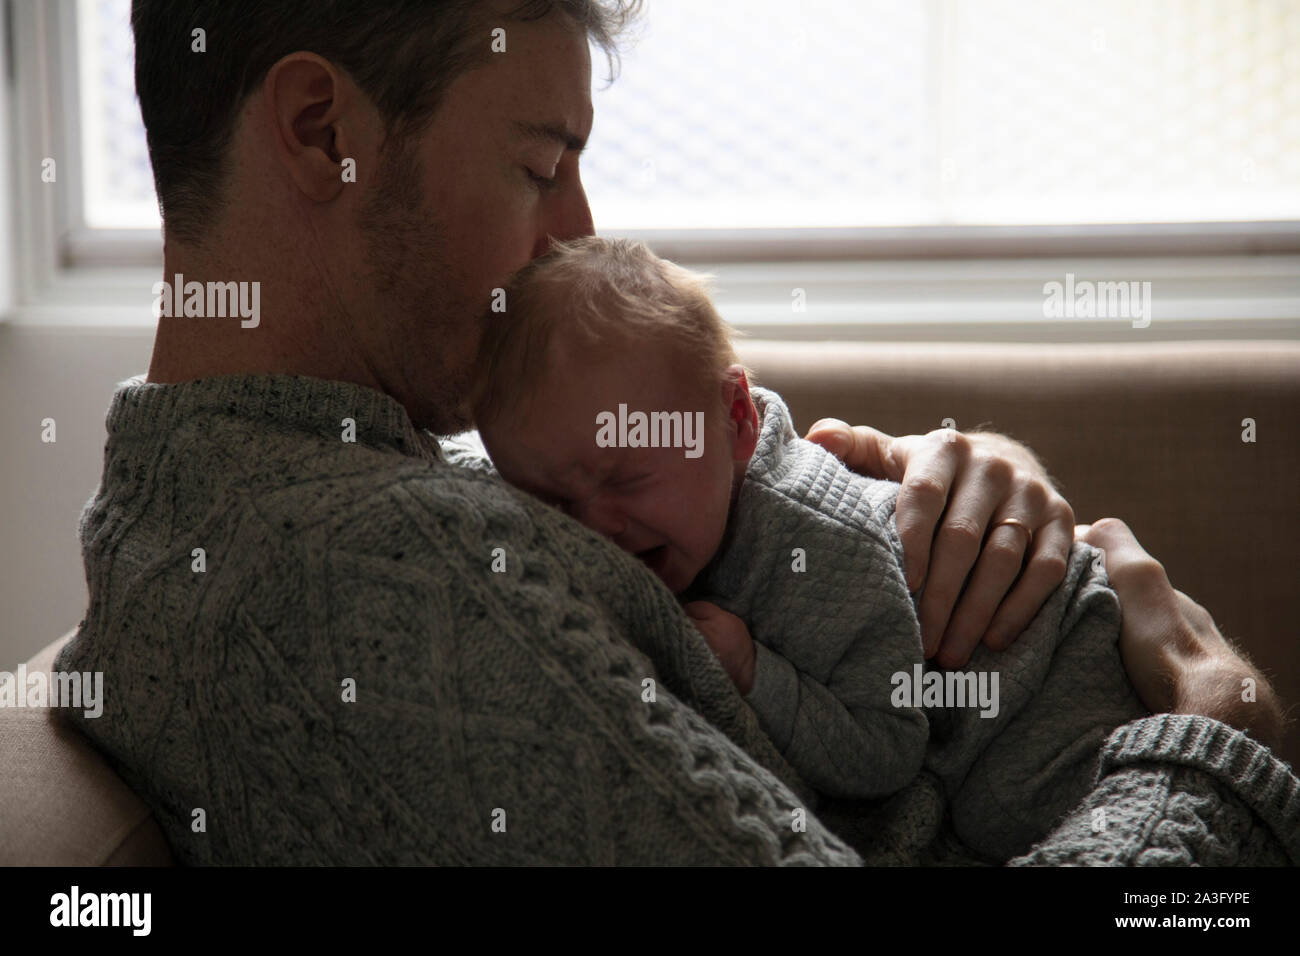 Father comforting a crying upset baby. Fatherhood, parenting concept Stock Photo